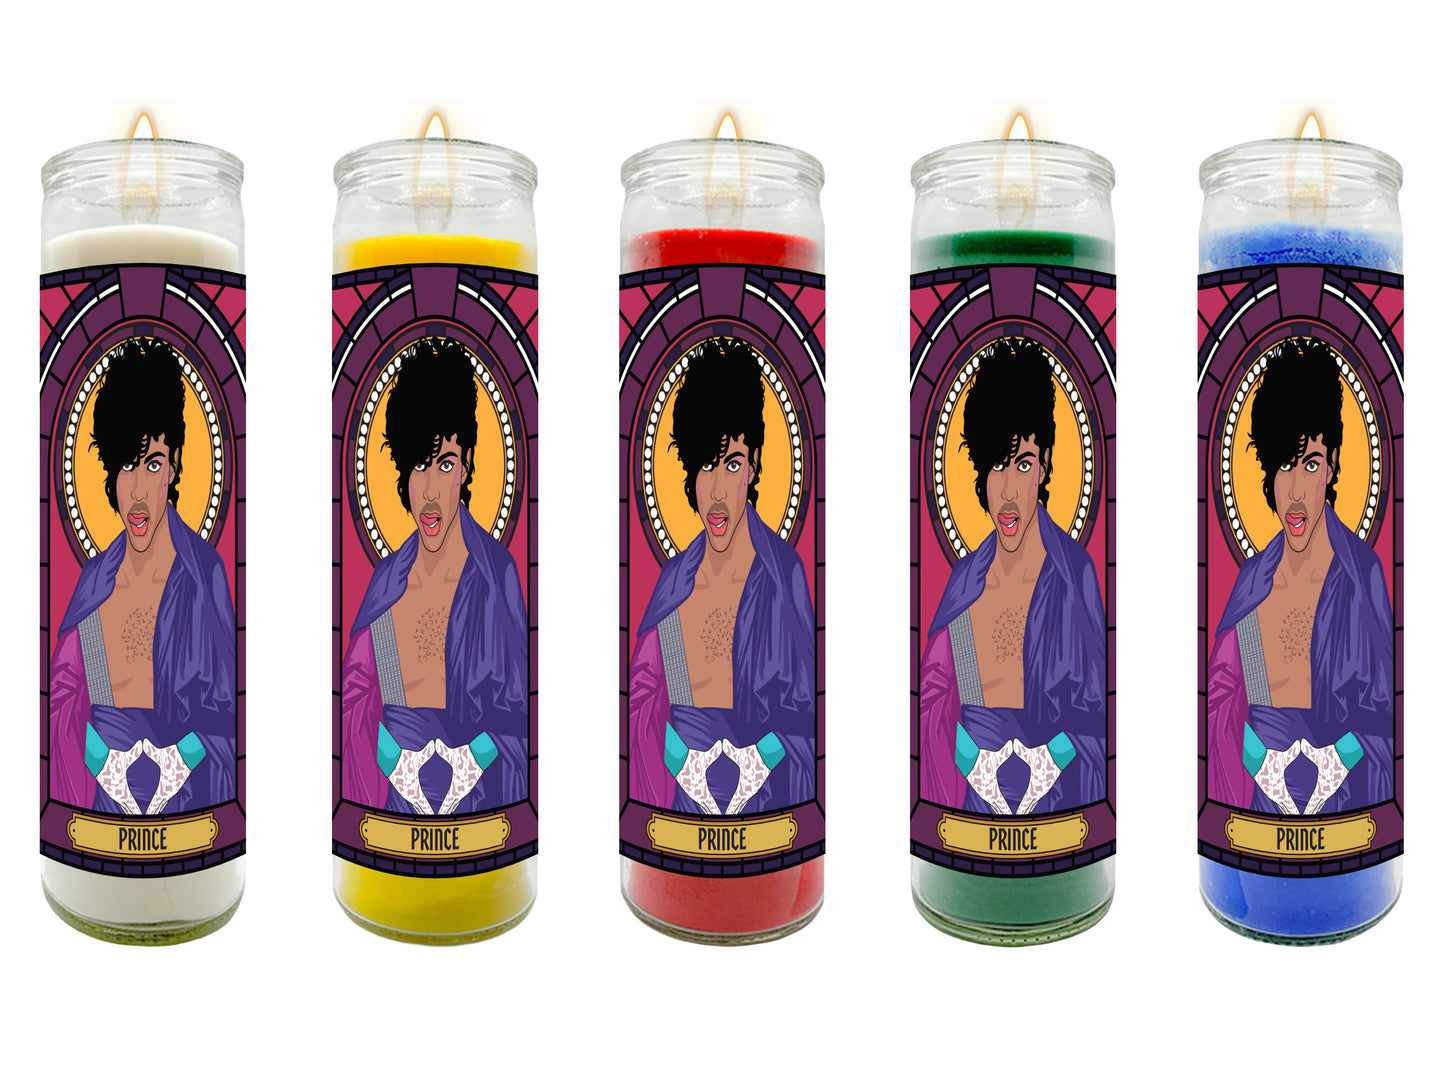 Prince Illustrated Prayer Candle